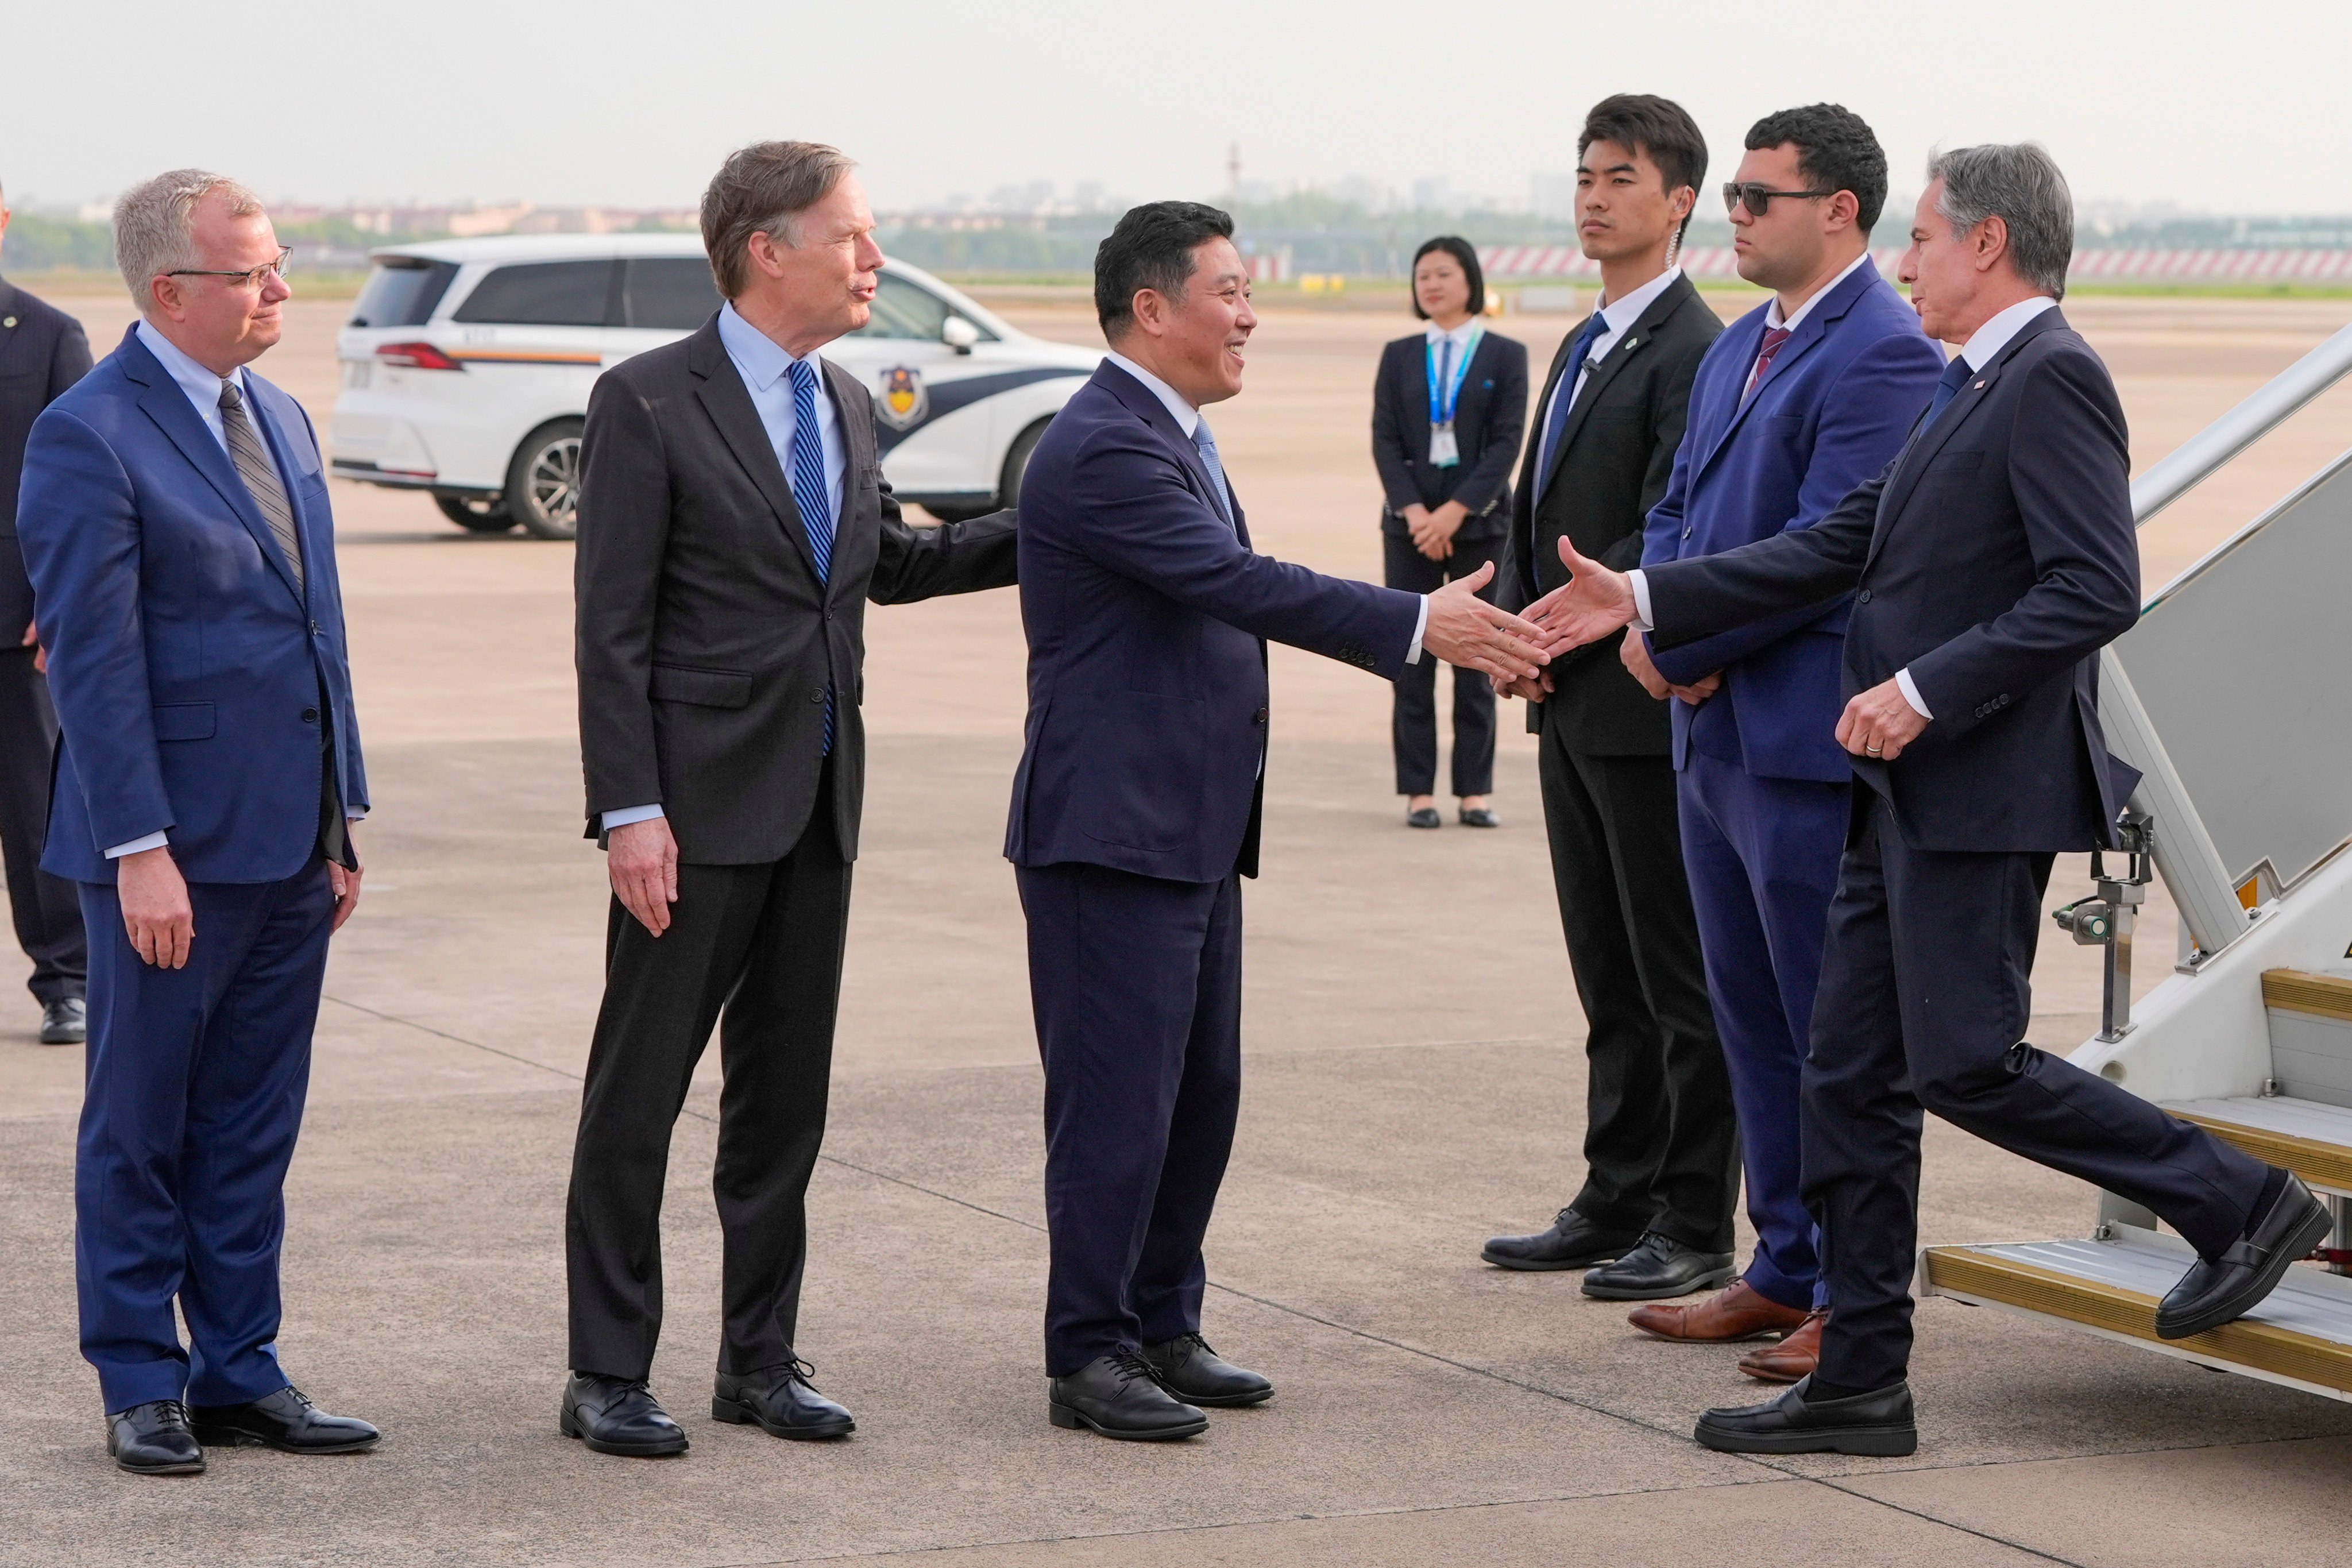 US Secretary of State Antony Blinken is greeted at the airport by Kong Fuan, director general of the Shanghai Foreign Affairs Office, as US ambassador to China Nicholas Burns and the US consul general in Shanghai,  Scott Walker, look on, in Shanghai on April 24. Photo: AP